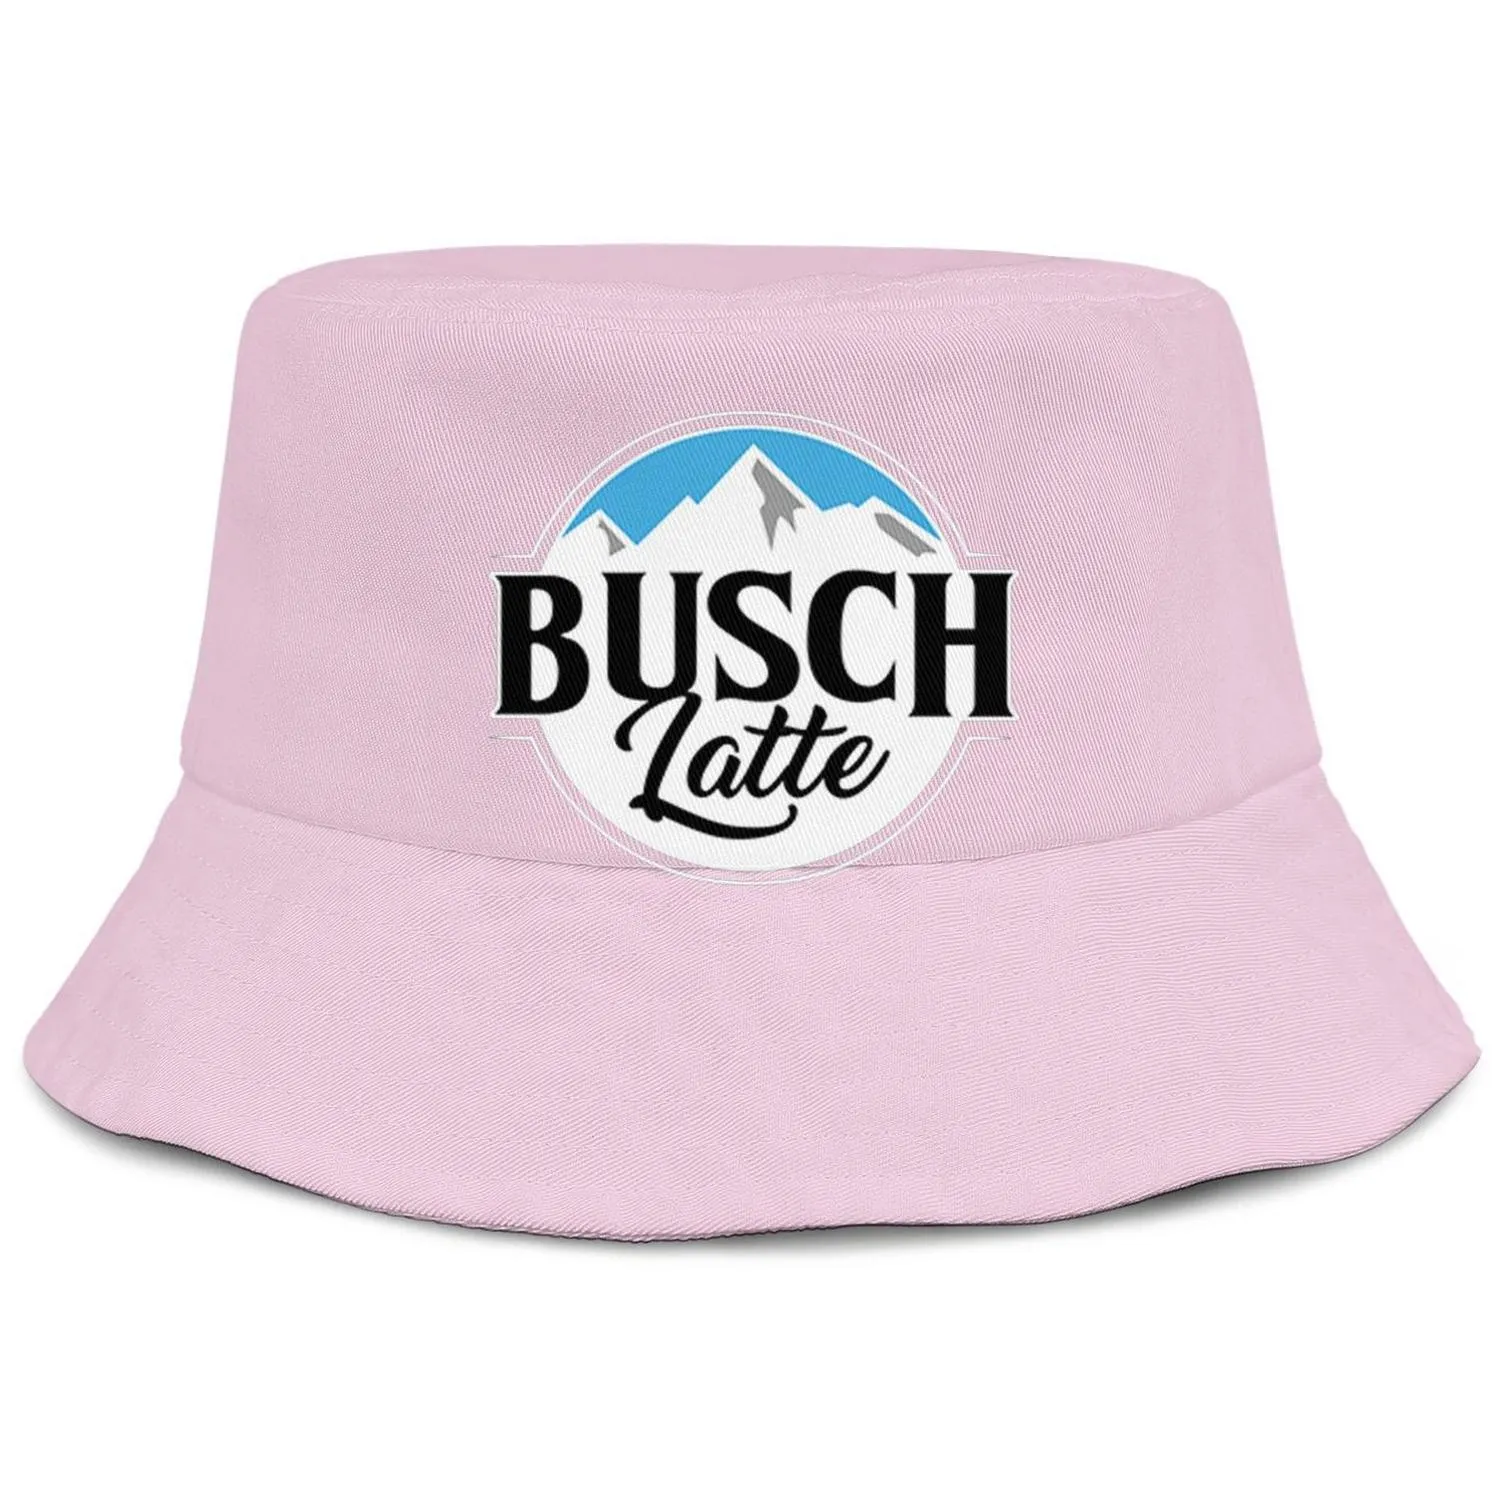 Busch Light Beer logo mens and womens buckethat cool youth bucket baseballcap light blue adge white Latte So Much320H